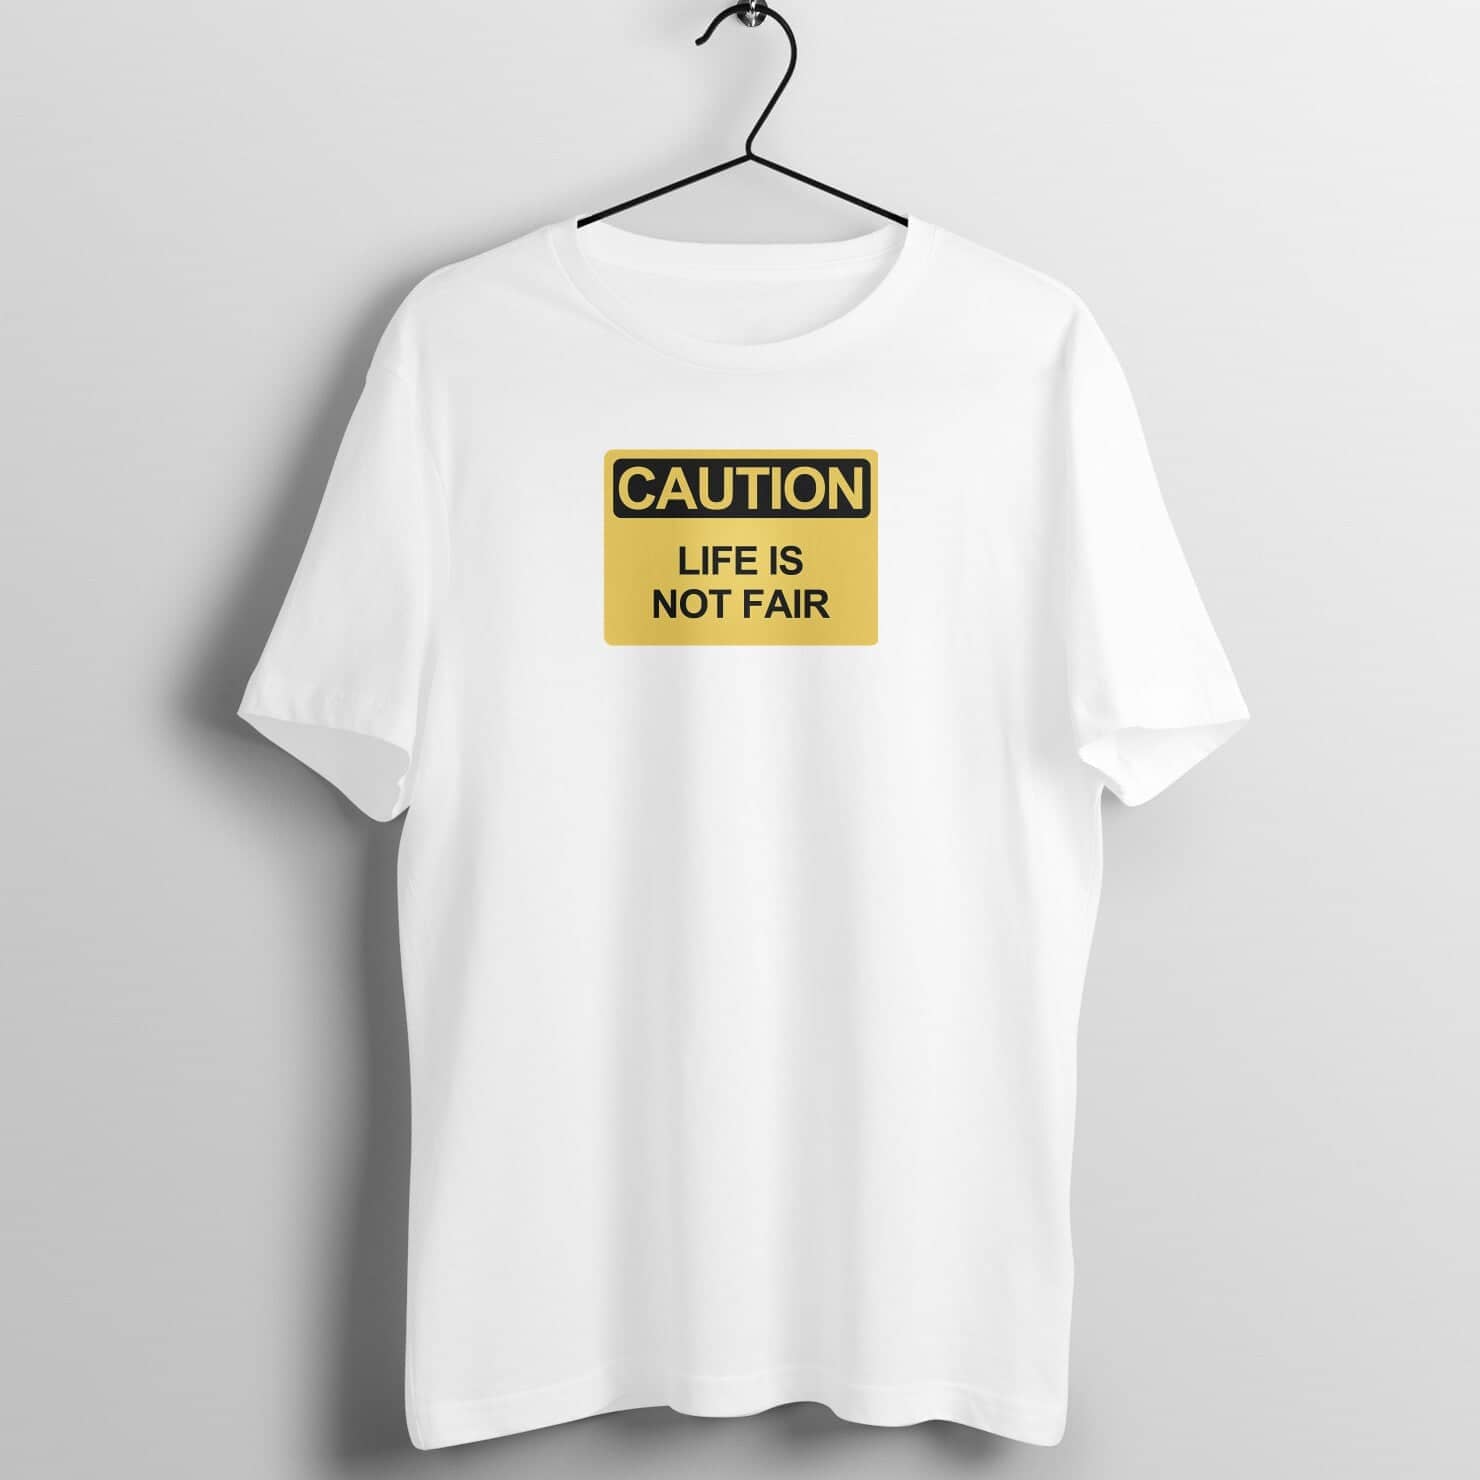 Caution Life is Not Fair Funny T Shirt for Men and Women freeshipping - Catch My Drift India